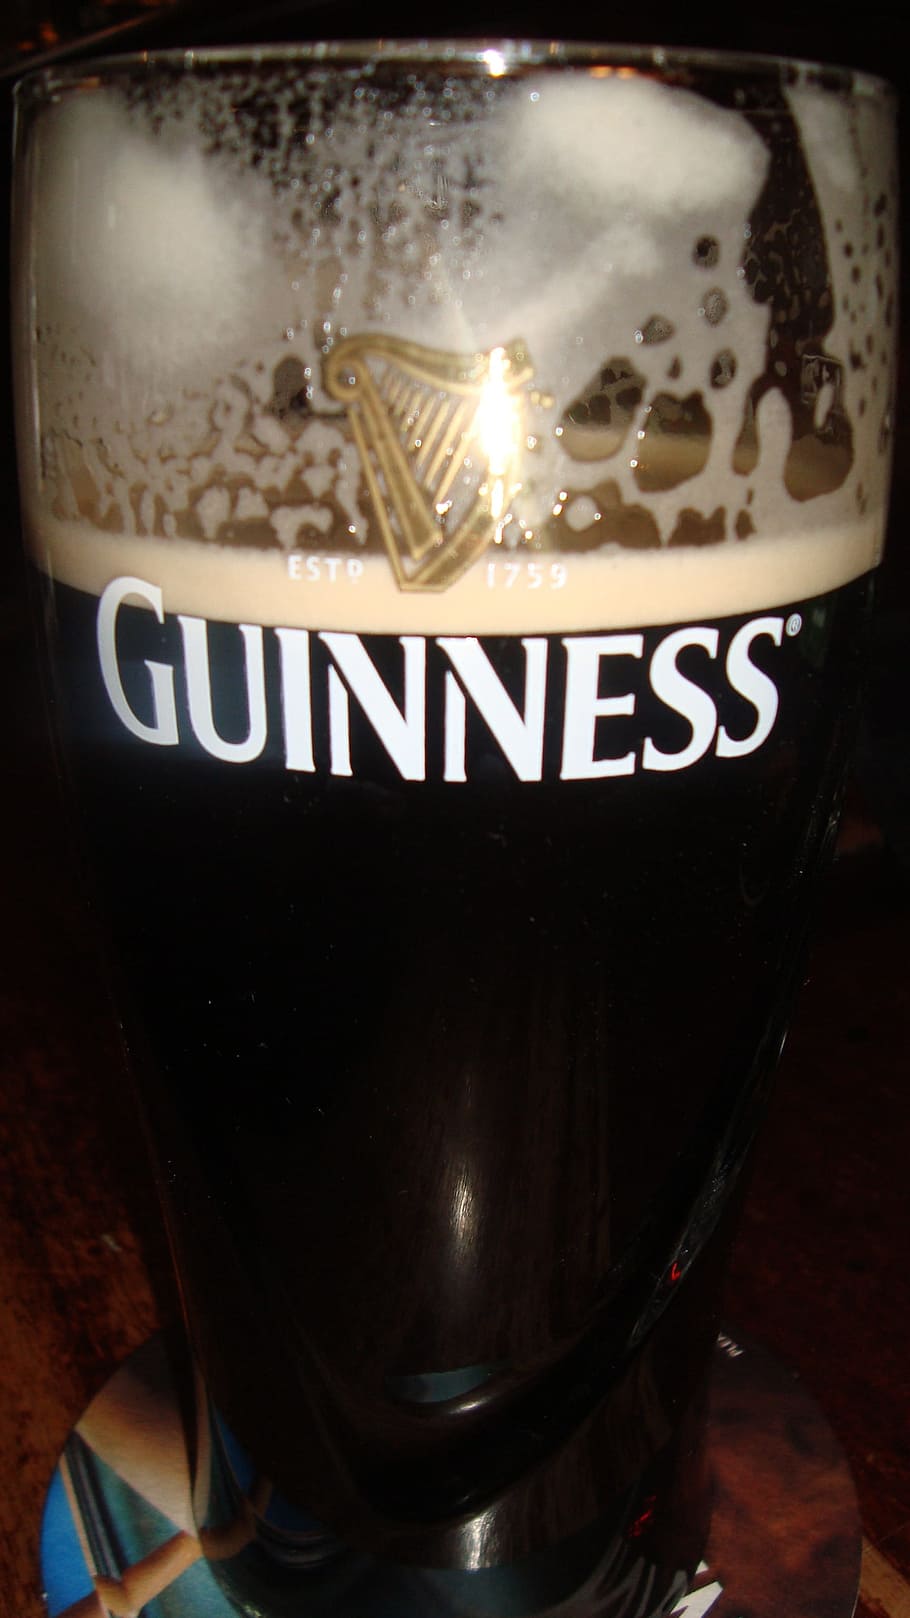 guinness, pint, beer, glass, alcohol, liquid, lager, beverage, froth, mug